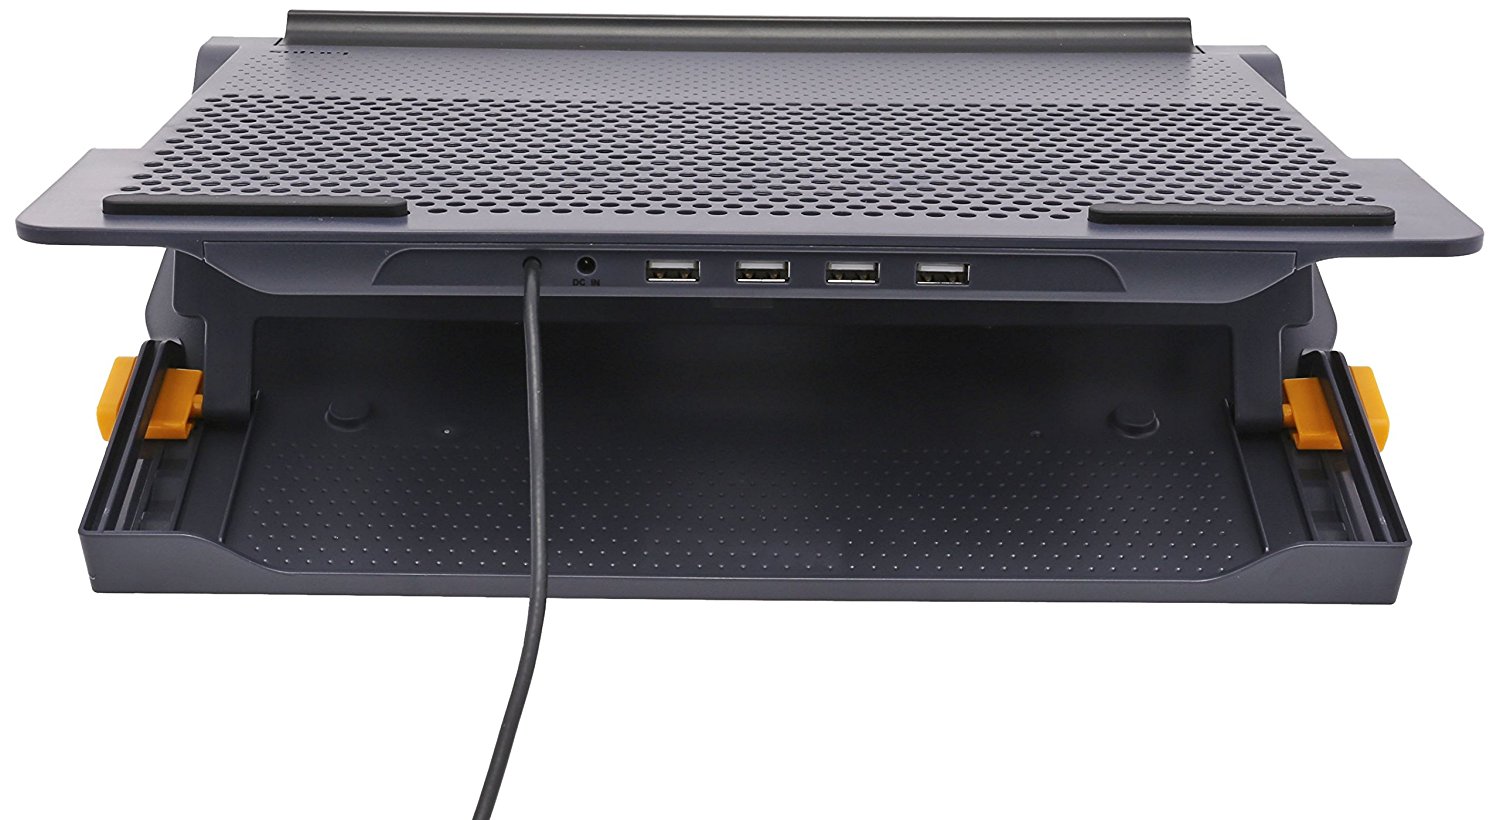 TARGUS WITH 4-PORT HUB FOR LAPTOP UP TO 17-INCH, BLACK (AWE81US)